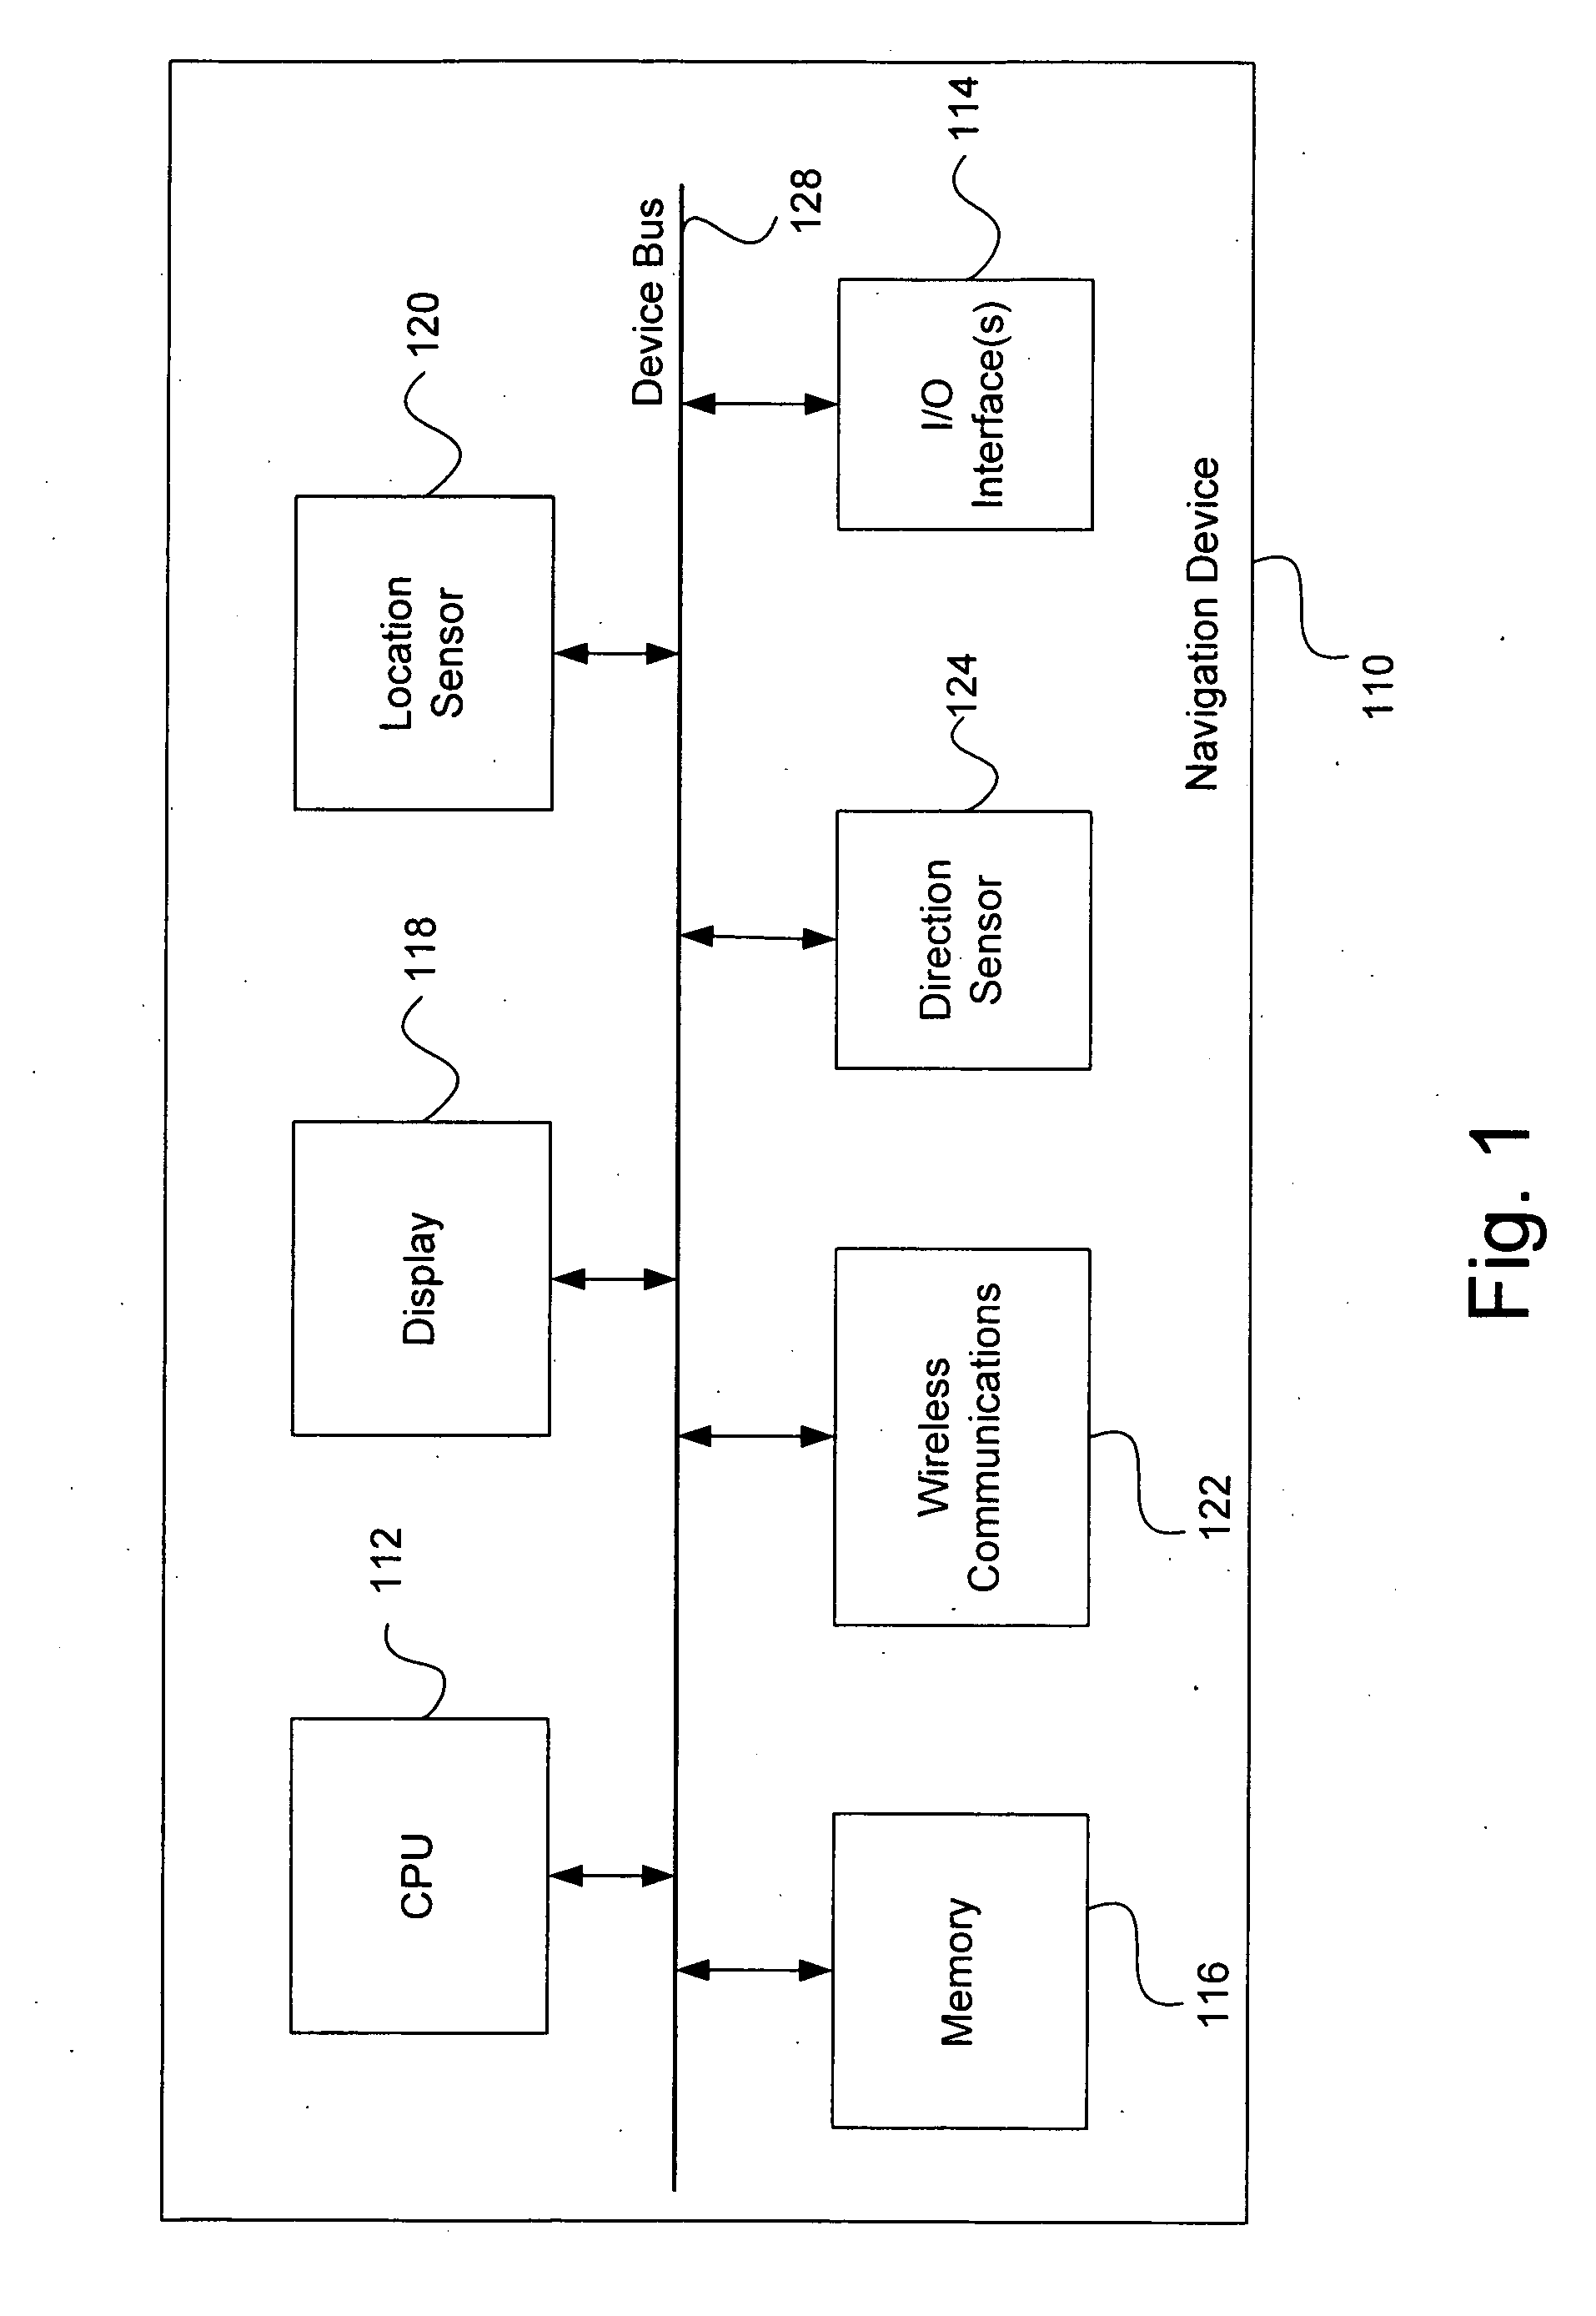 System and method for effectively implementing an electronic navigation device